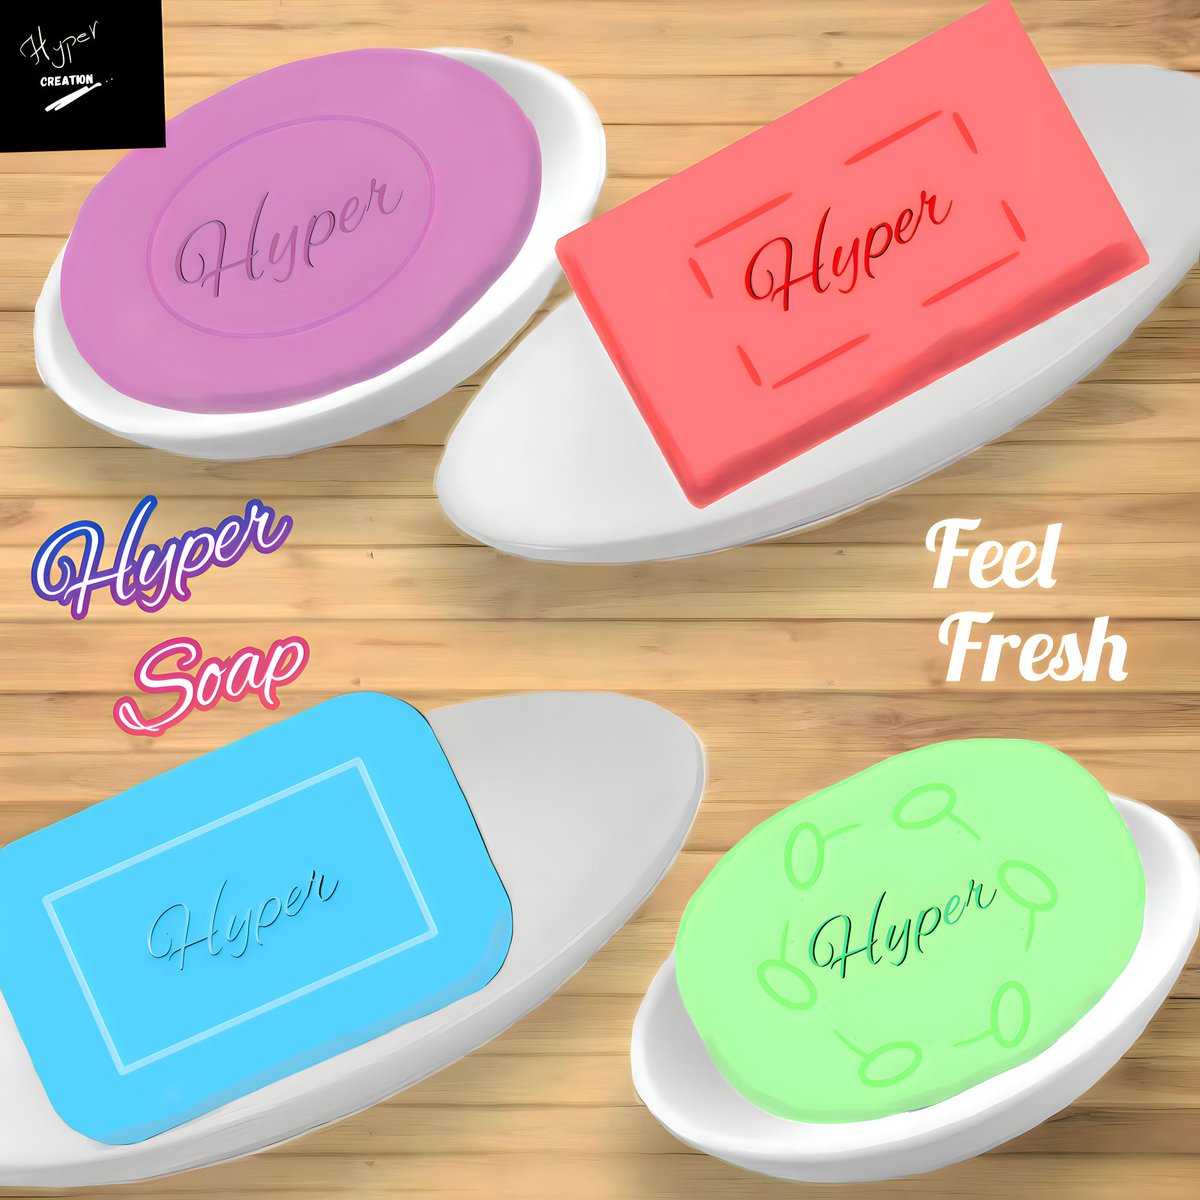 Product name: Hyper Soap Product type: Bathing Soap Colour: Miscellaneous Tagline: Feel Fresh Logo: Hyper_Creation This shows you how you can sum up all the types of of soap with different designs and colours into one image. #soap #bodysoap #bath #bathsoap #Hyper_Creation